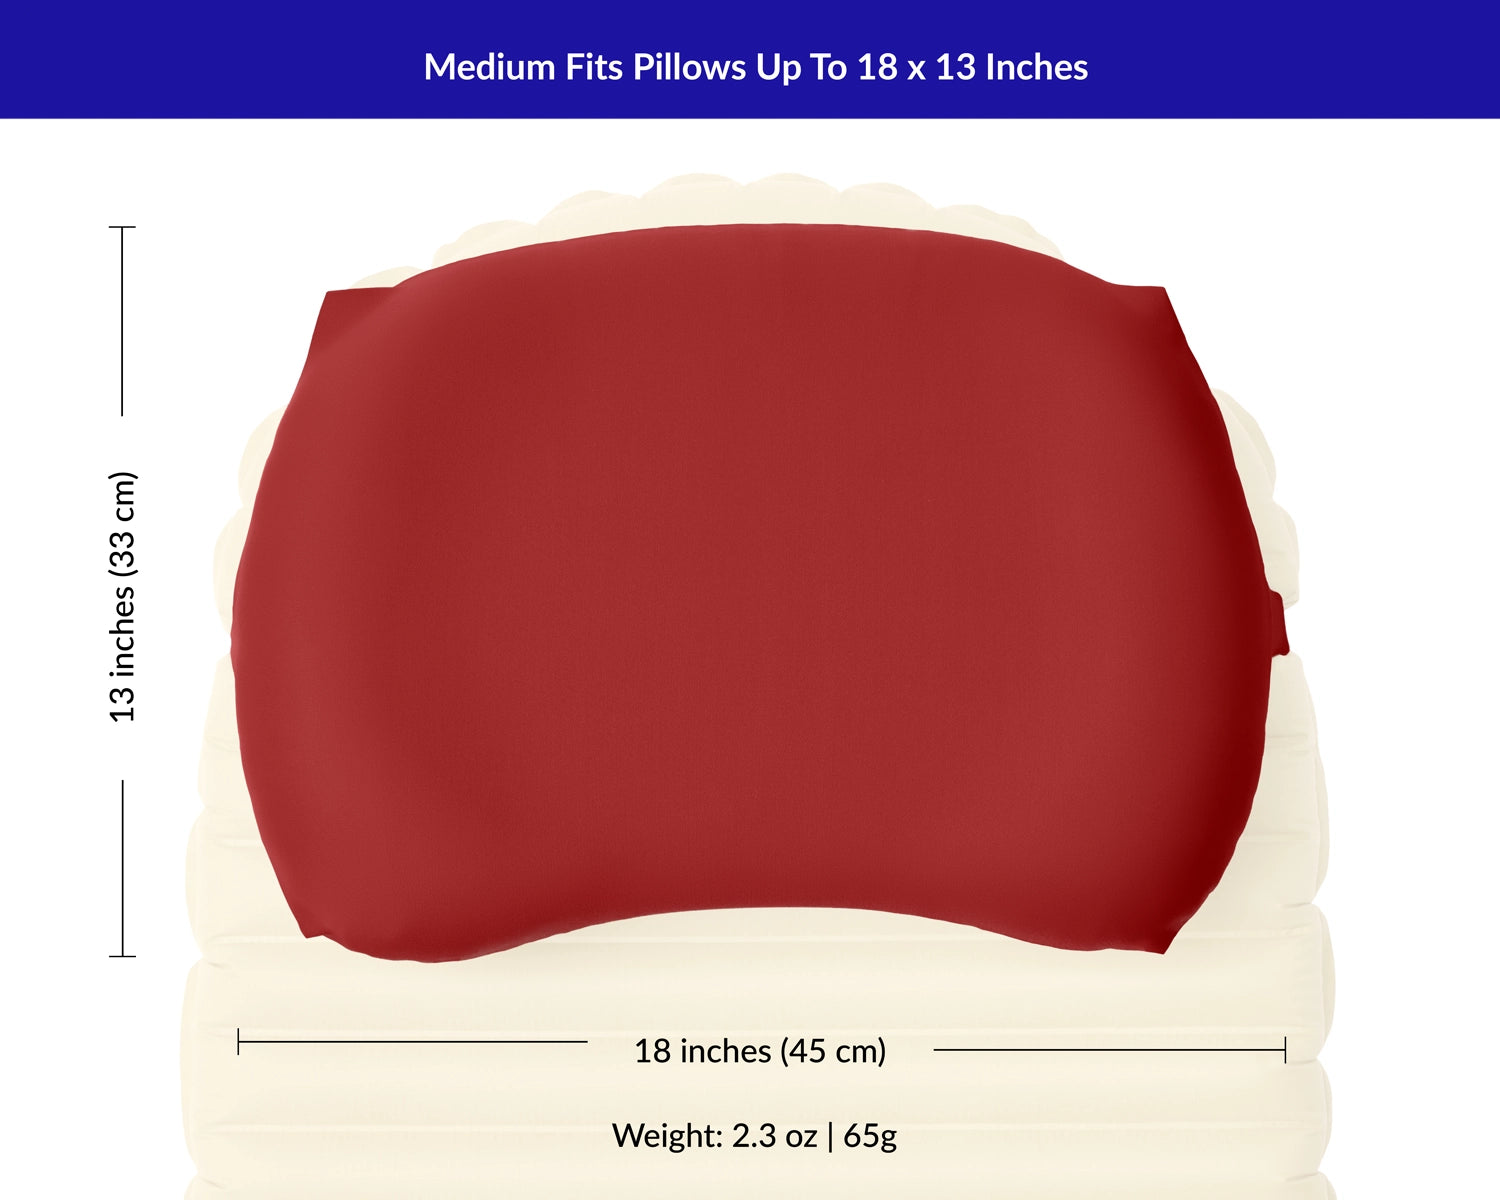 Measurements for maximum camp pillow size for medium Pillow Strap is 18 by 13 inches.